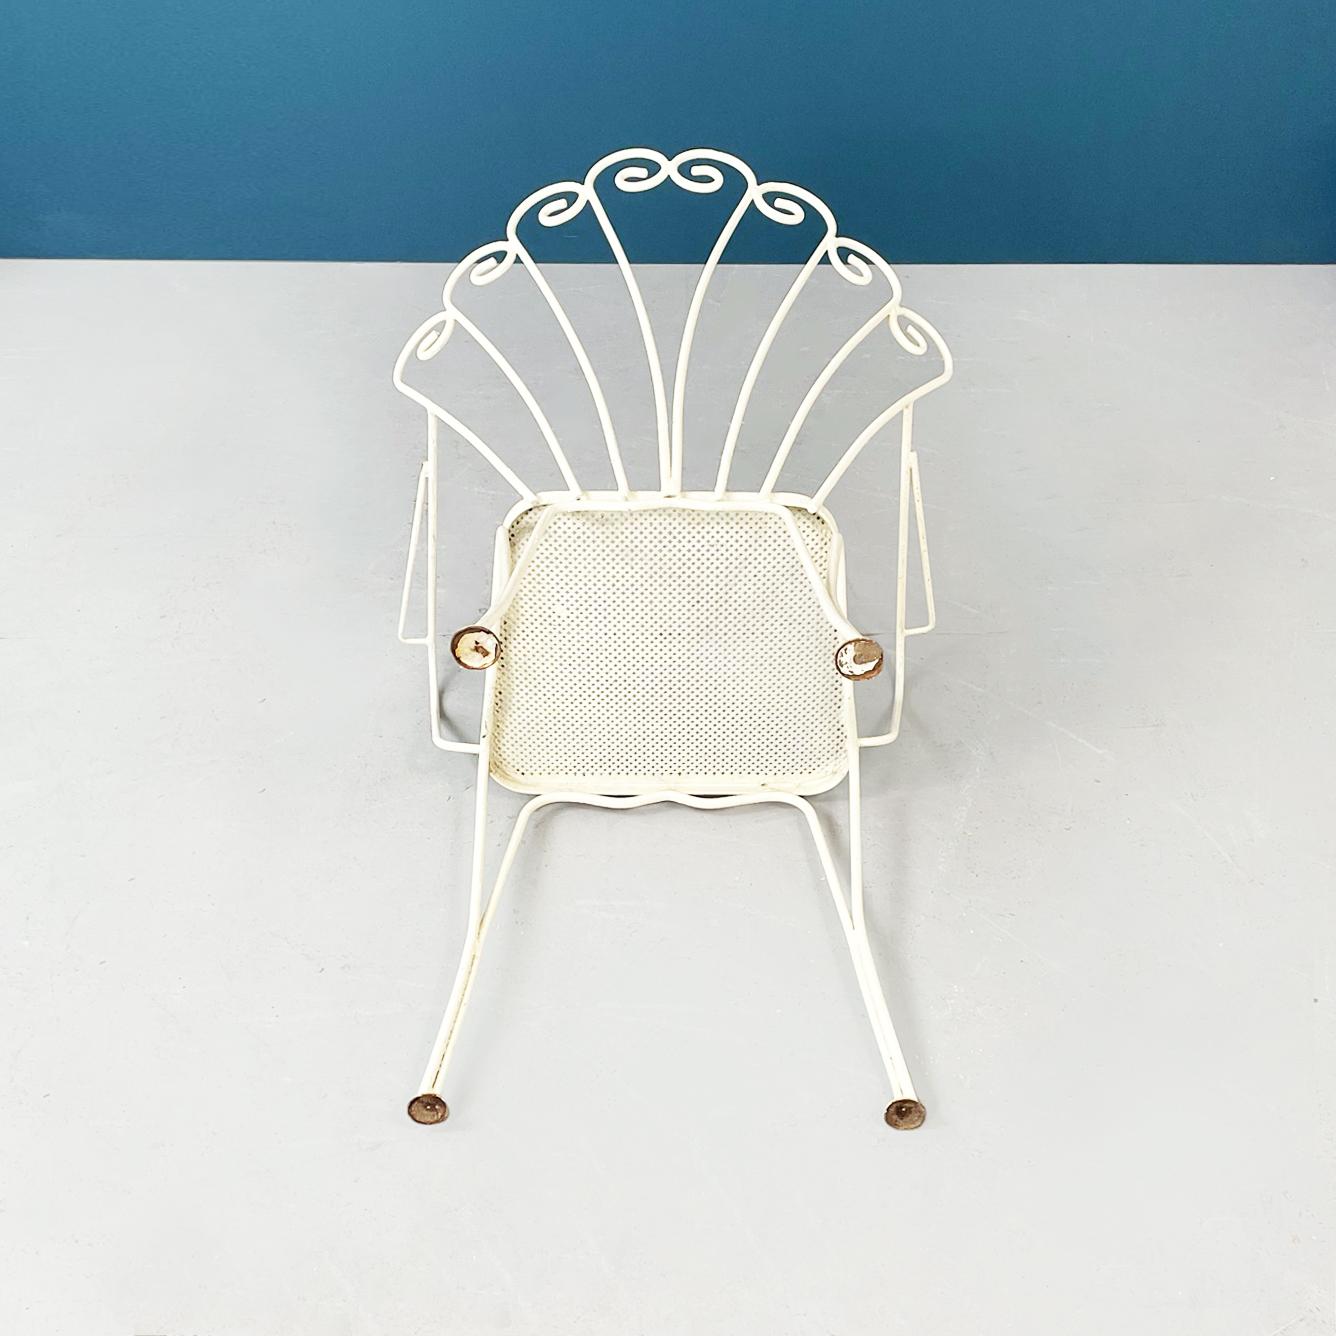 Italian Mid-Century Modern Garden Chairs and Table in White Wrought Iron, 1960s For Sale 7